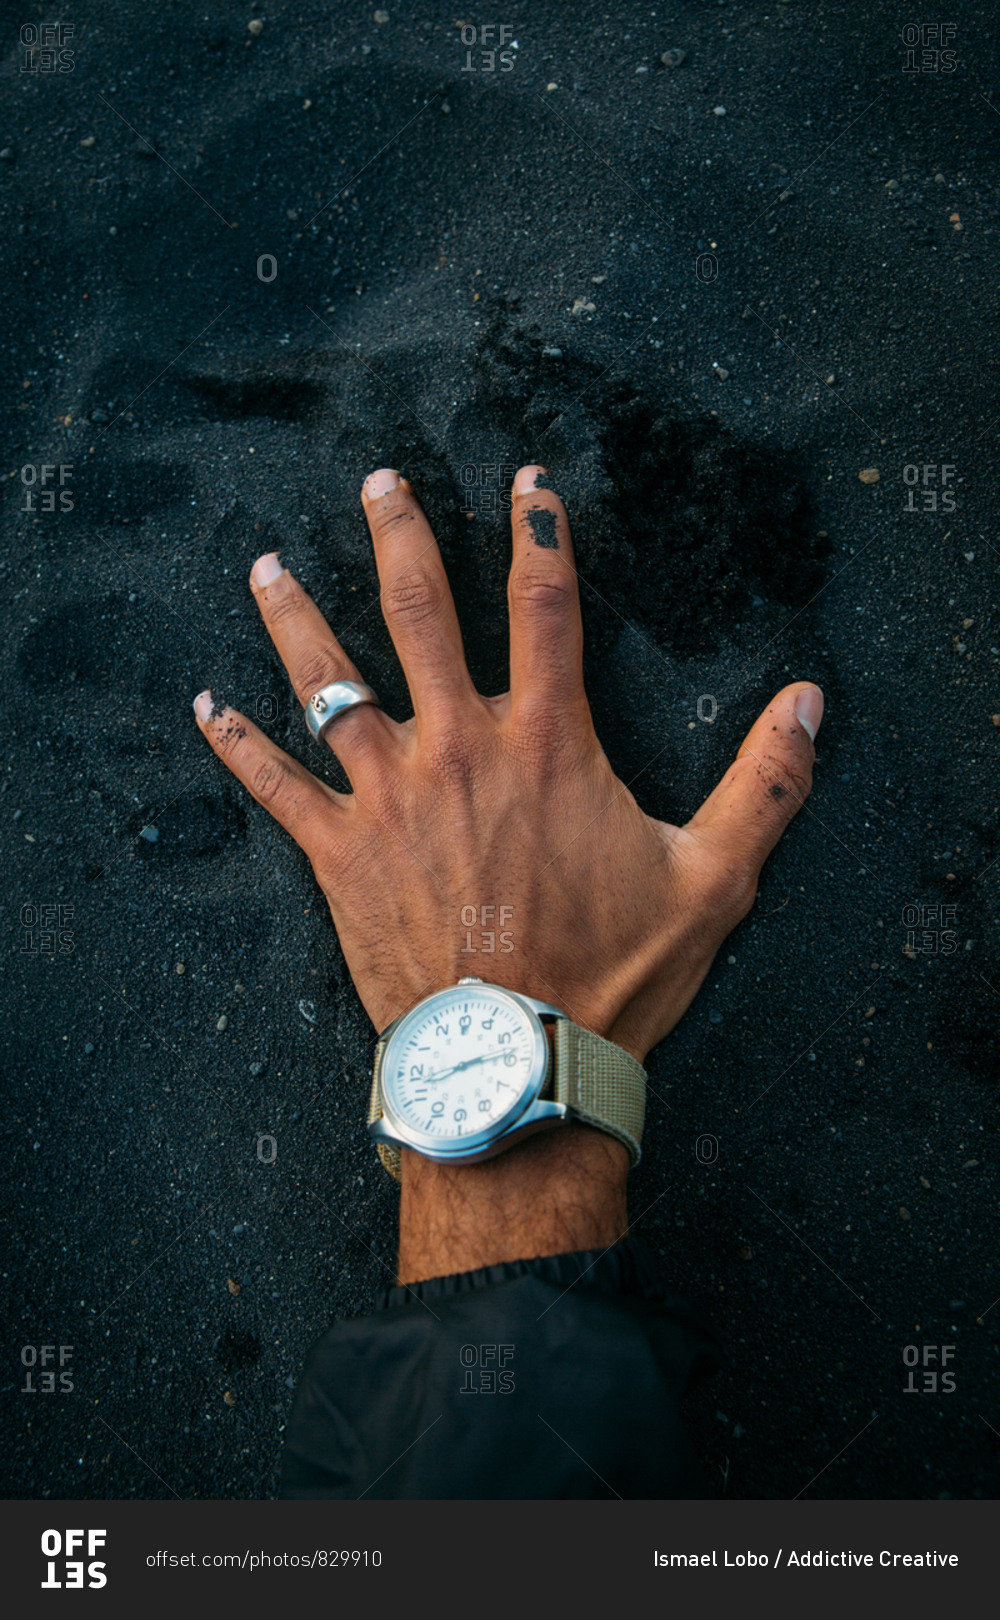 From above hand of anonymous man with ring and watch touching black dirt in countryside